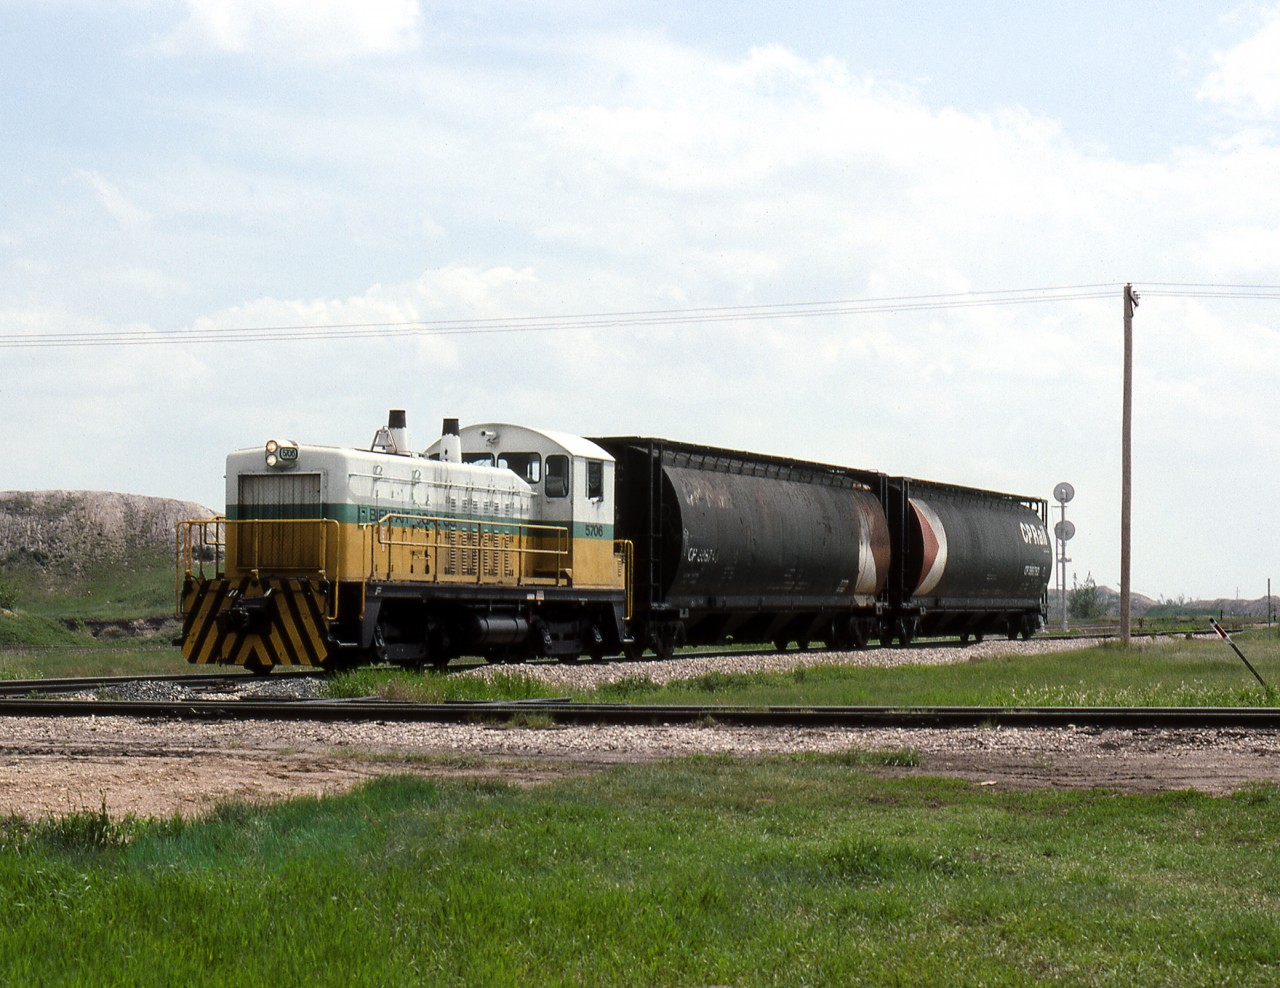 Bienfait Coal Co.'s ex MILW EMD TR4a 5706 with 2 cars of coal fines used in making charcoal BBQ briquettes crosses the the CN Lampman Subdivision on its way to the CPR Yard. The mine, formerly the Manitoba and Saskatchewan Coal co. shipped unit trains to Atikokan Ontario and Brandon Manitoba until steam generation was discontinued in early 2000's by both Manitoba and Ontario. Mine still serves the mine mouth Shand Power plant near Estevan but little moves by rail anymore from the once very busy Souris River coal fields around Estevan